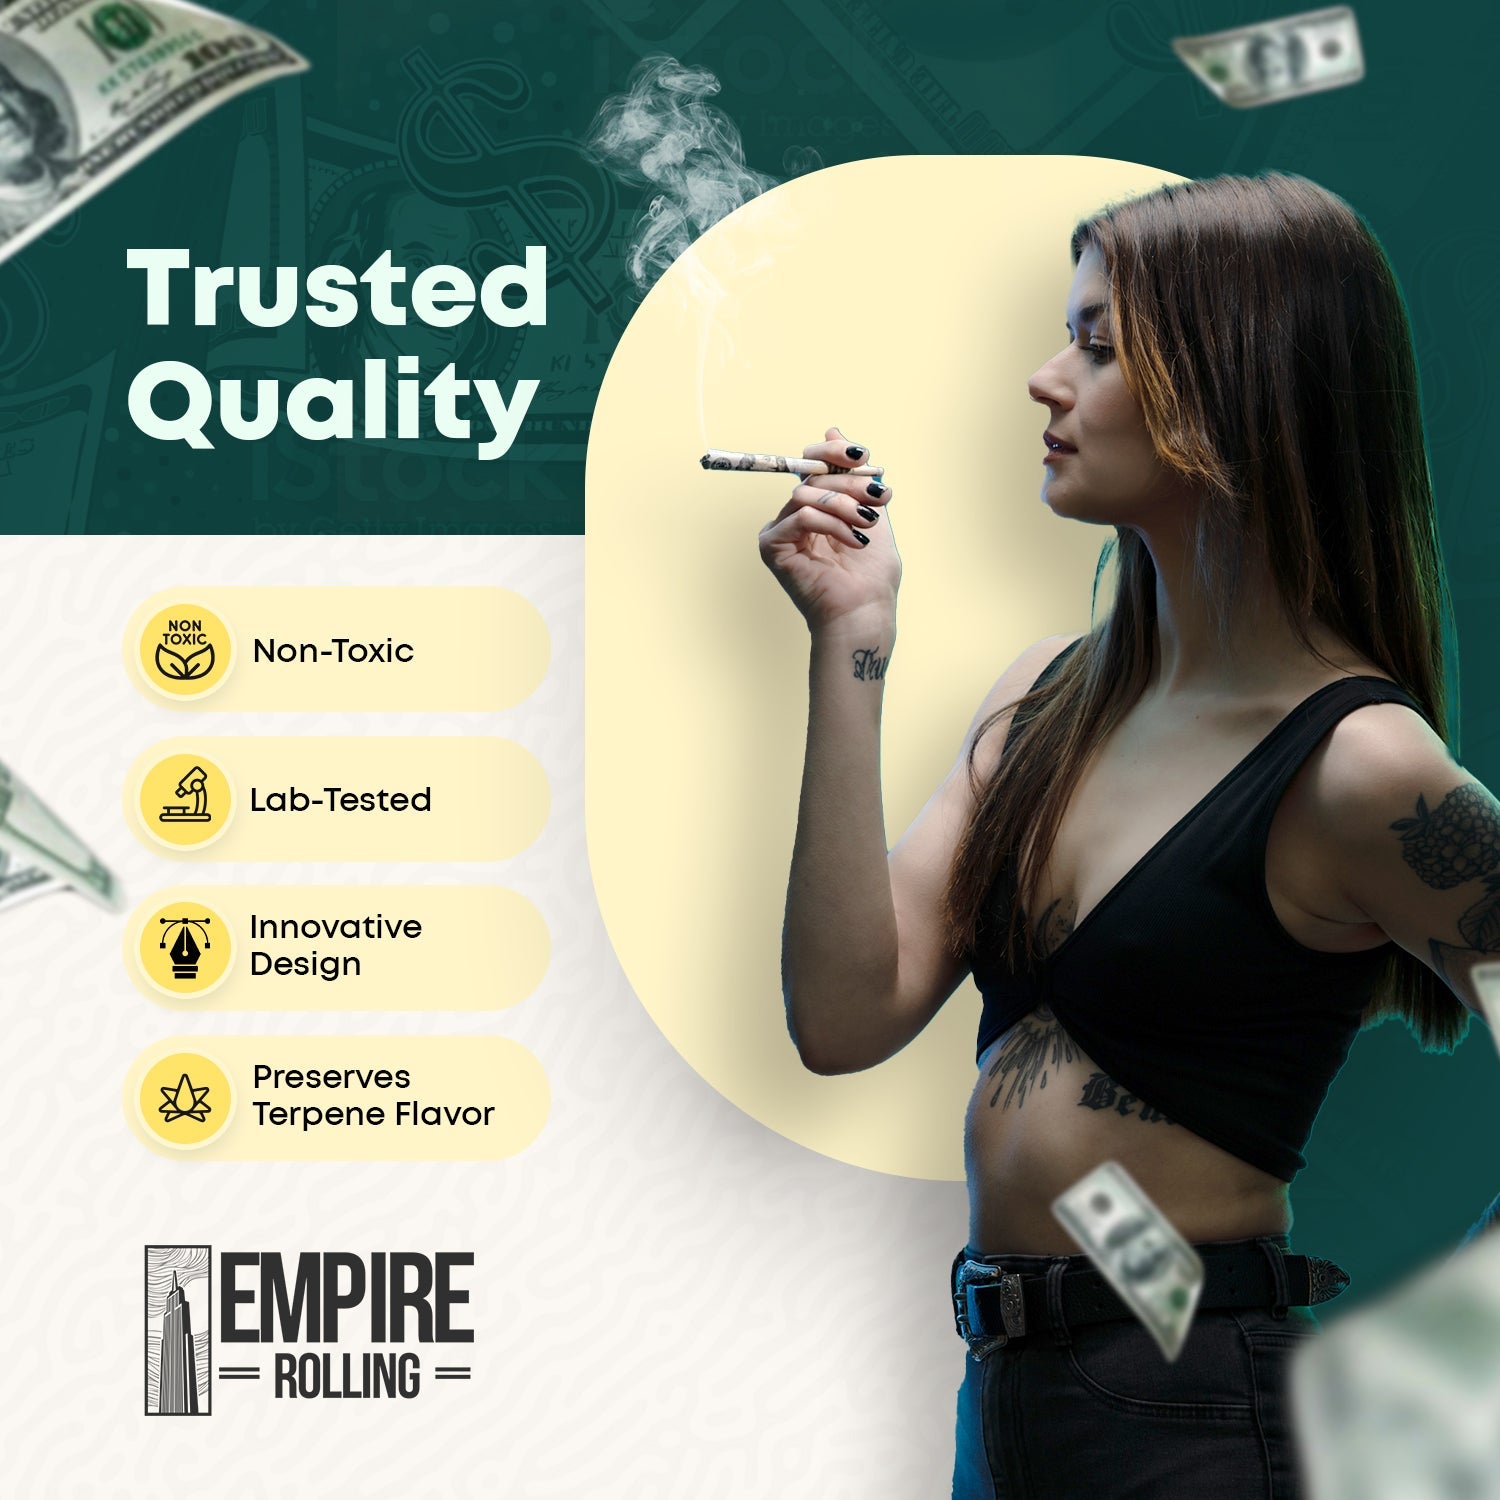 Empire Rolling's King Size Organic Hemp Rolling Papers, eco-friendly and crafted with high-quality, natural materials for a premium smoking experience.Benny OG Bundle - Empire Rolling Papers